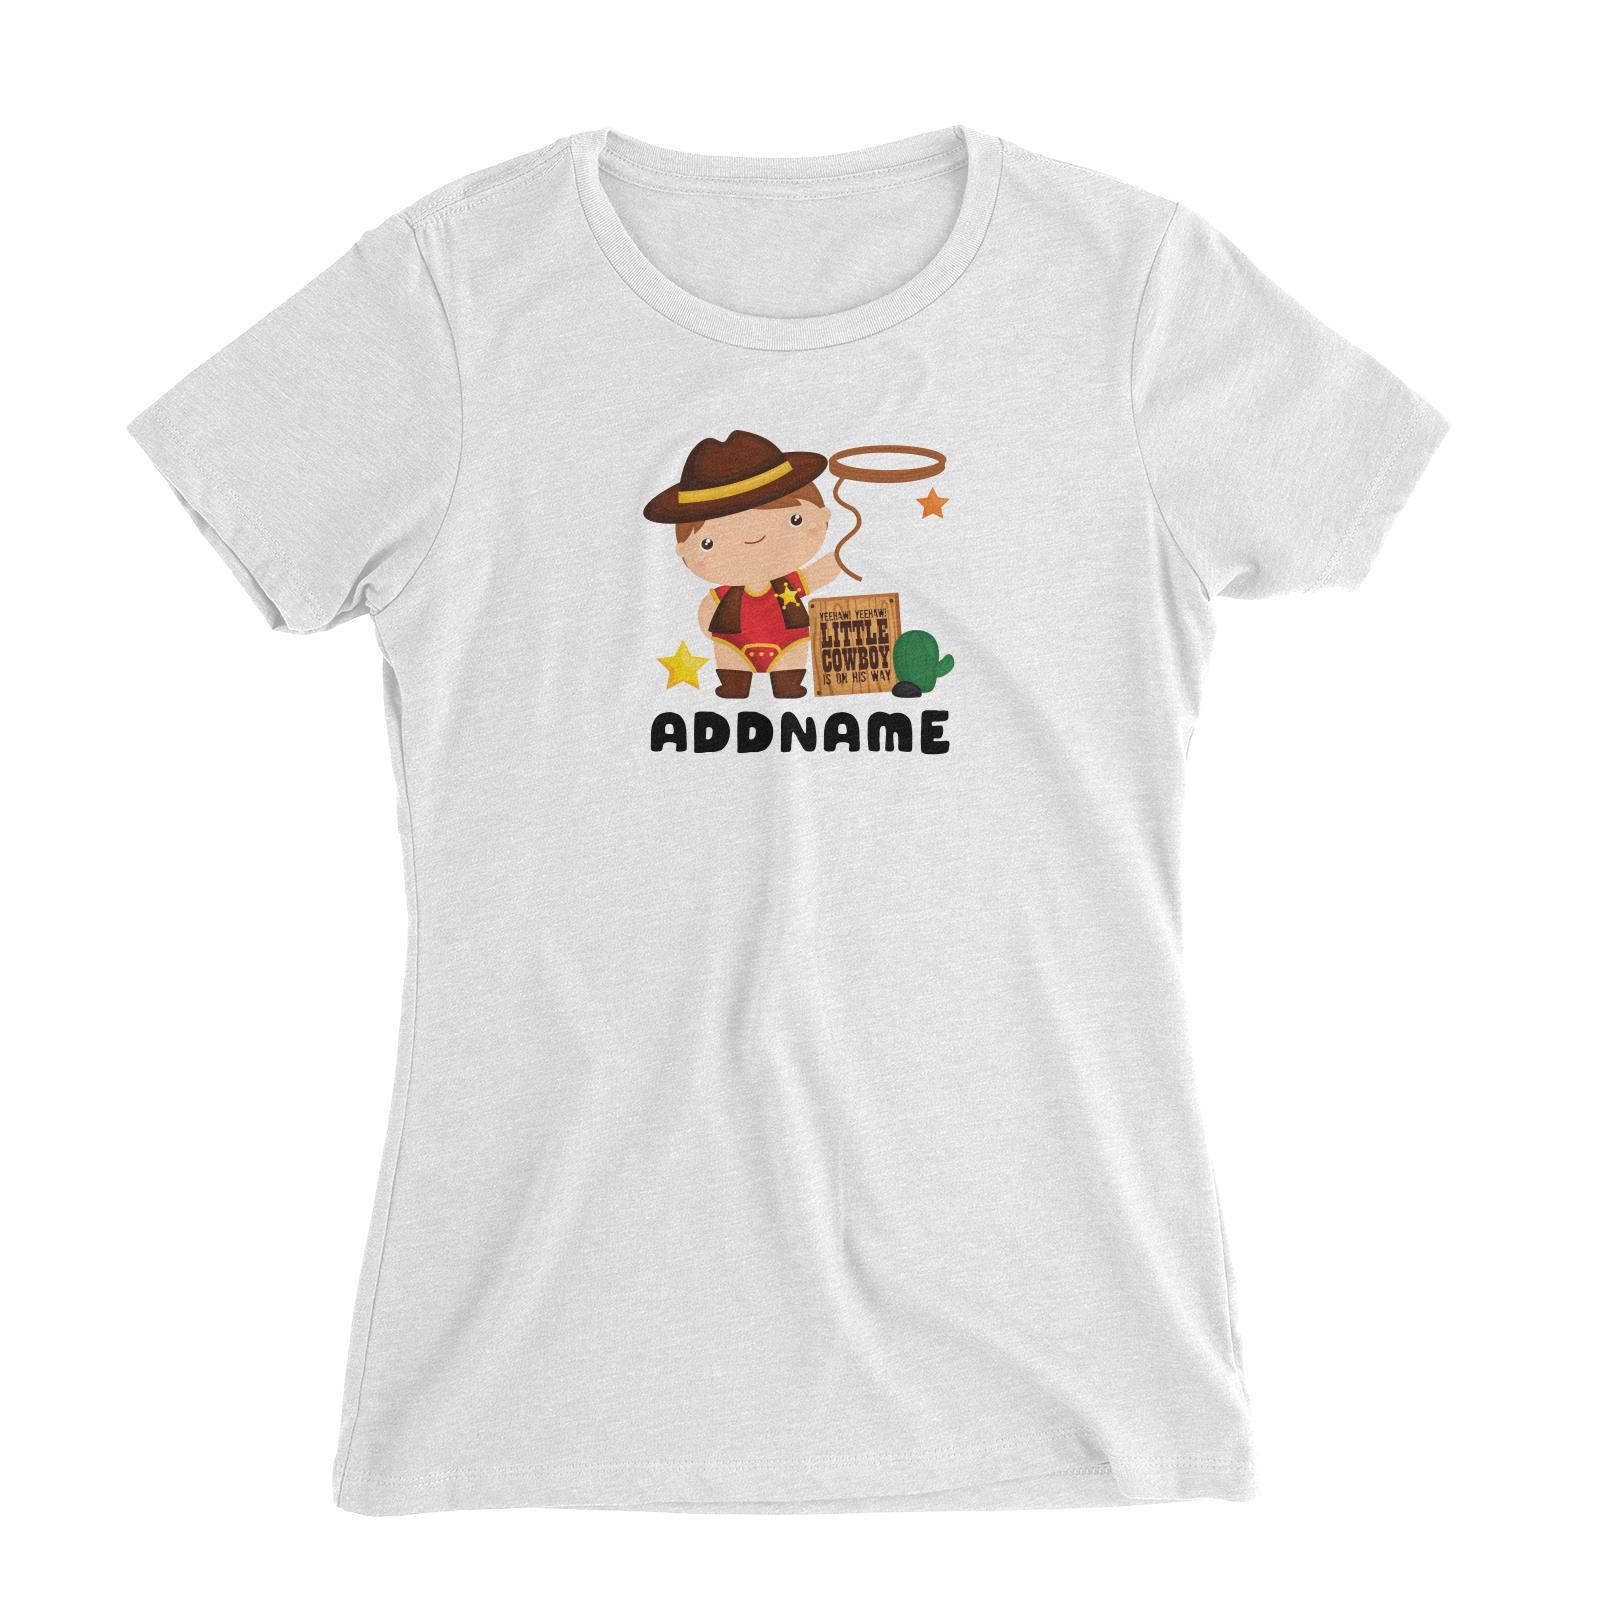 Birthday Cowboy Style Yeehaw Little Cowboy Is On His Way Addname Women's Slim Fit T-Shirt